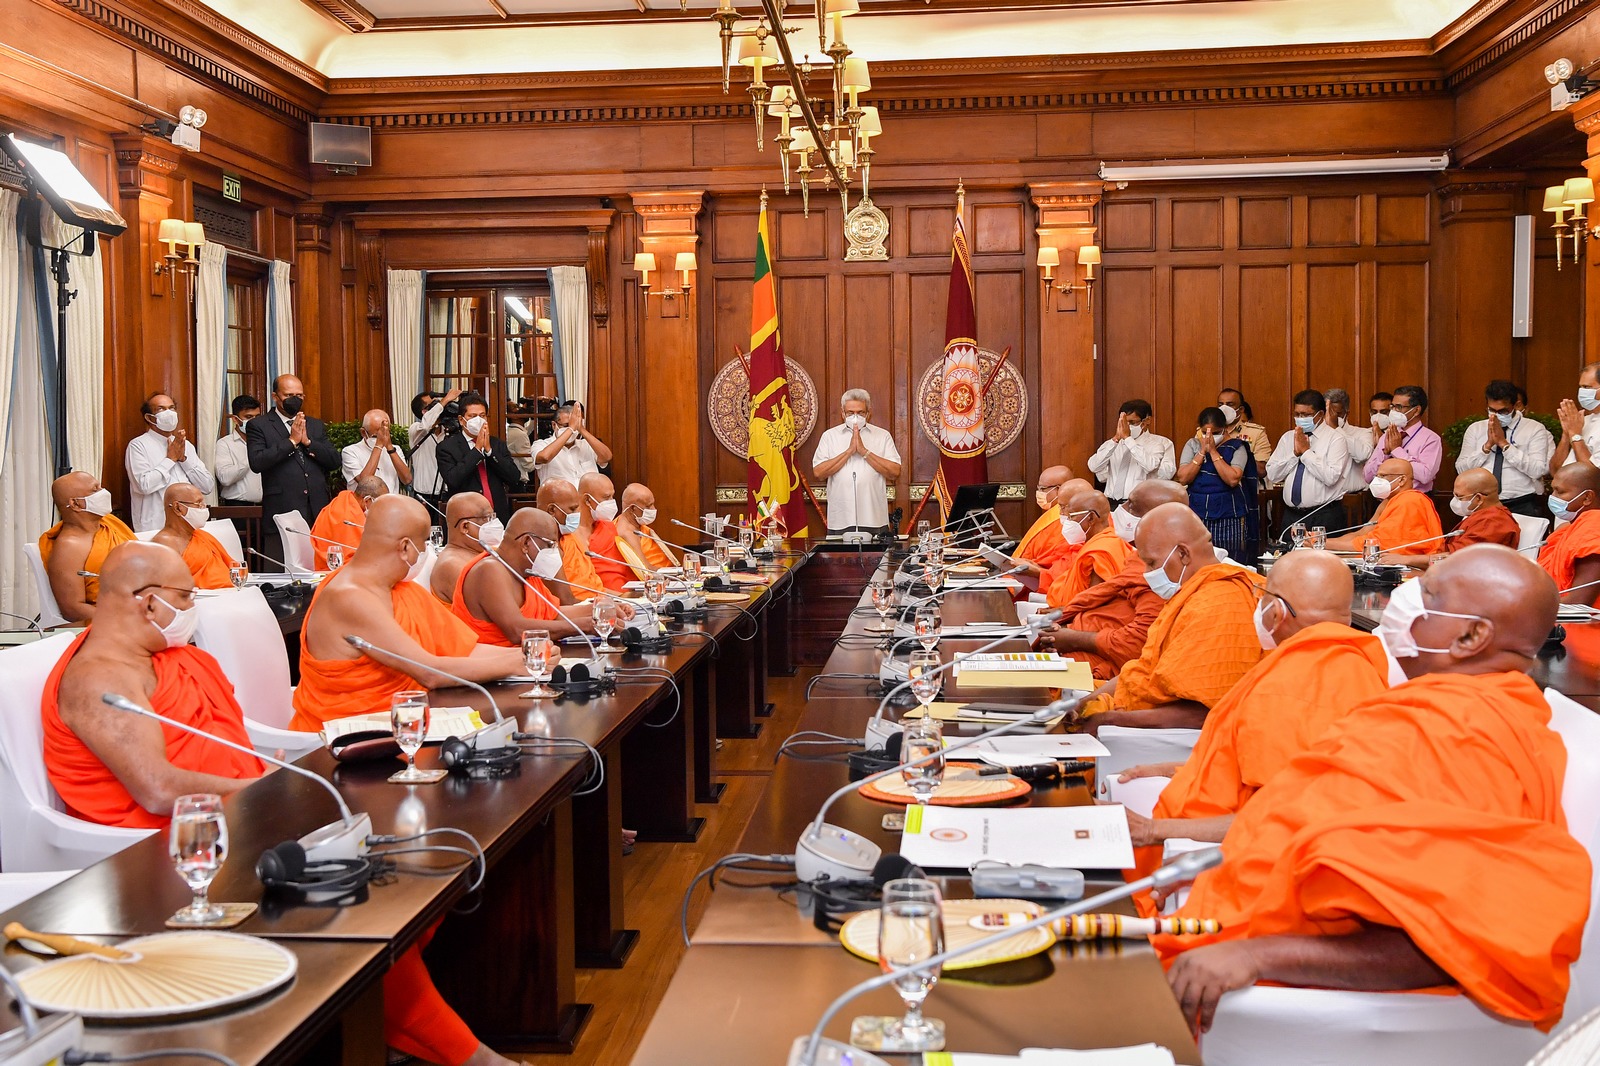 The results of well-planned and far-sighted decisions have become a reality – The Maha Sangha